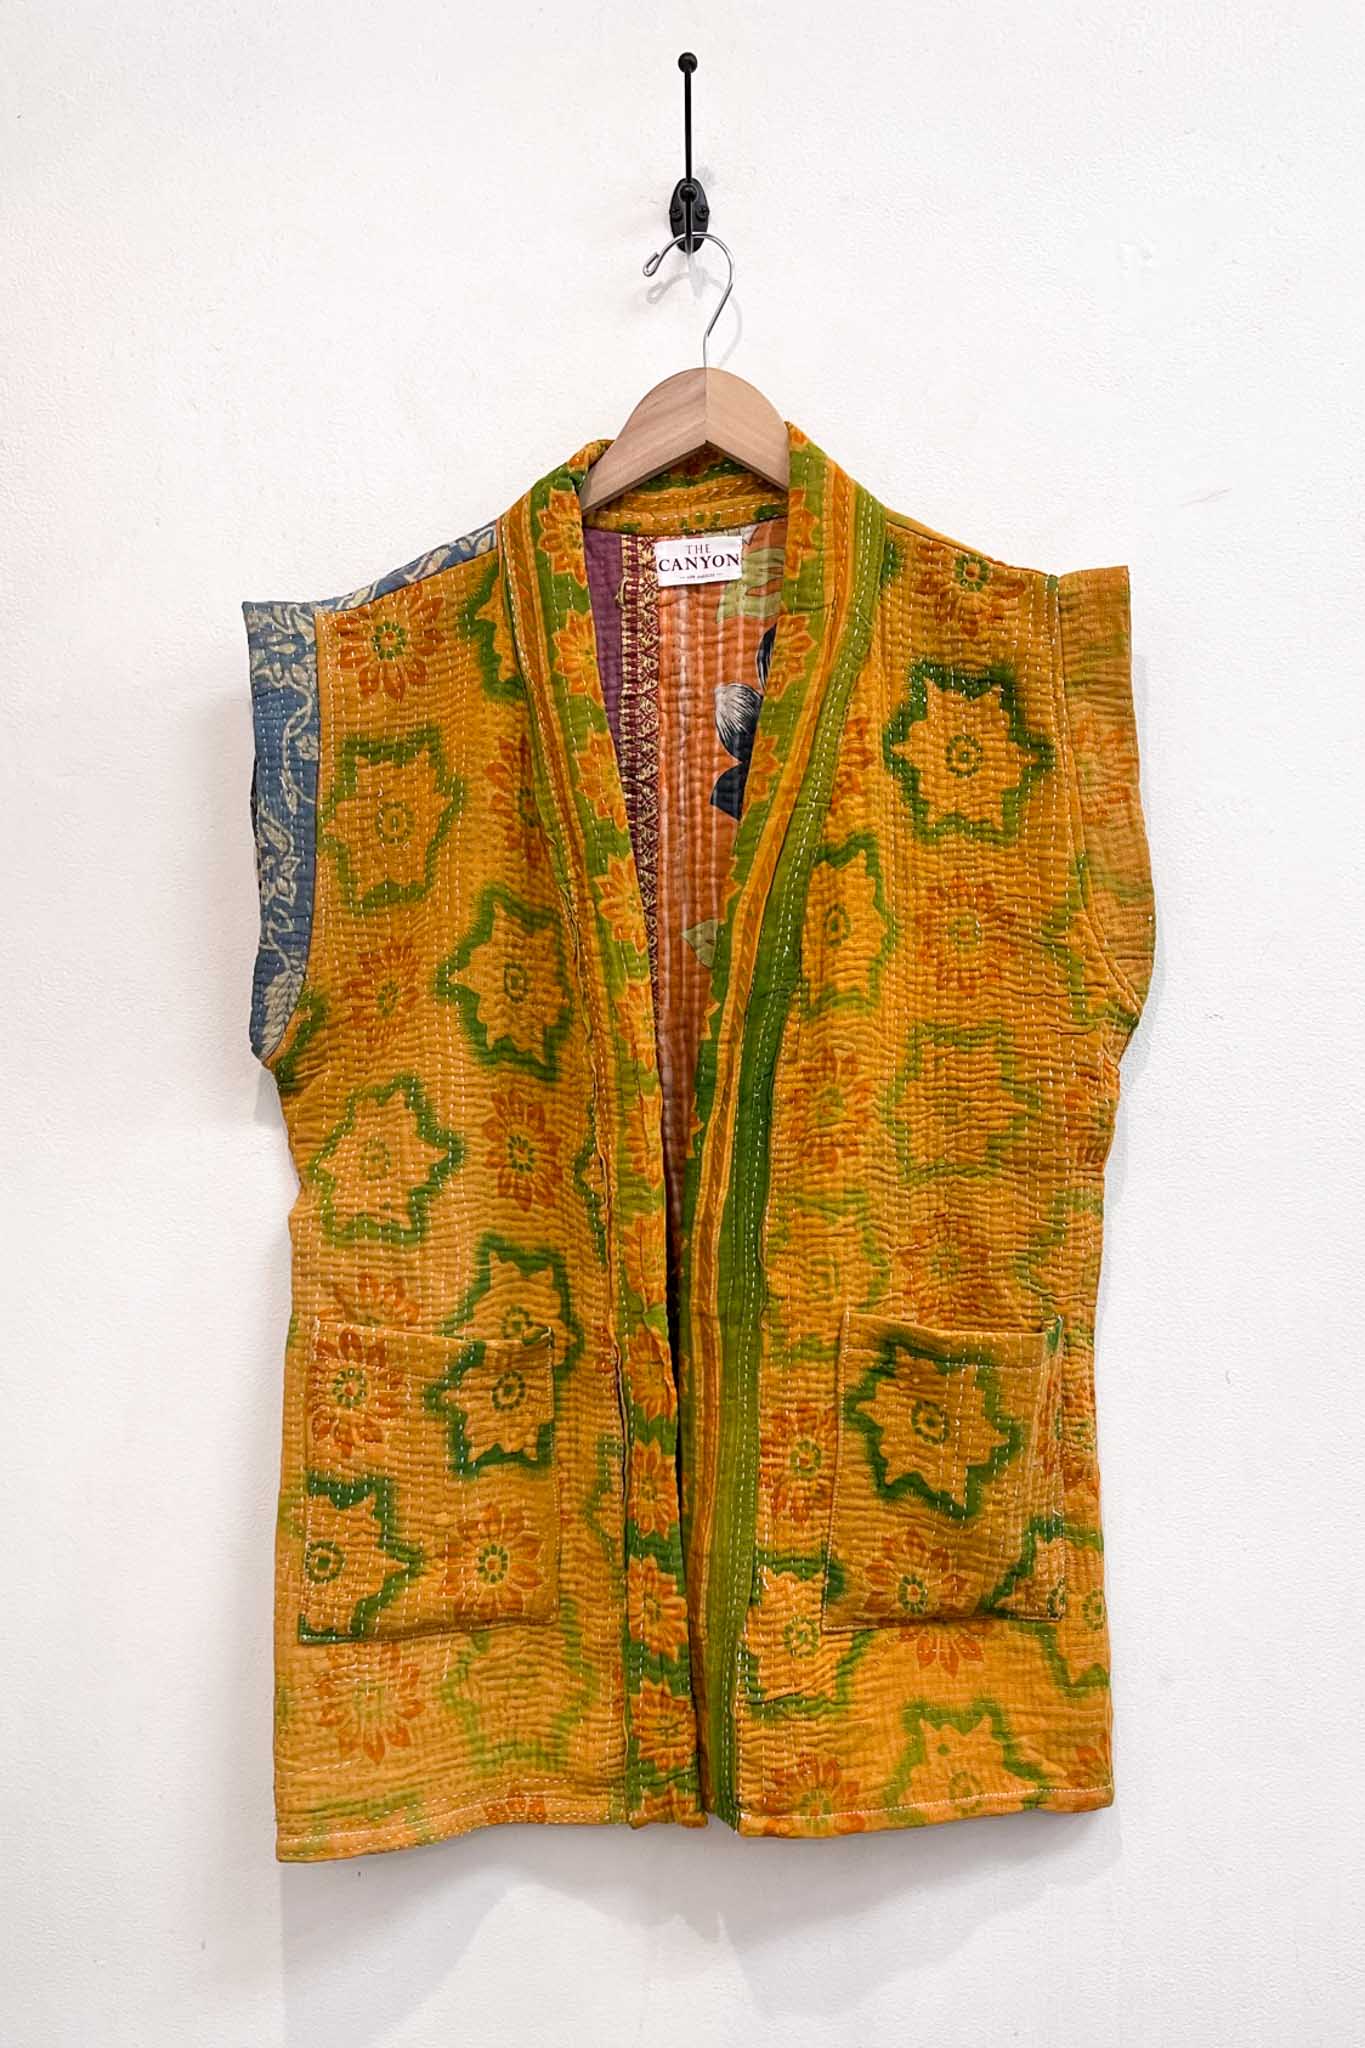 Vintage Kantha Vest - Changing Seasons Outerwear The Canyon